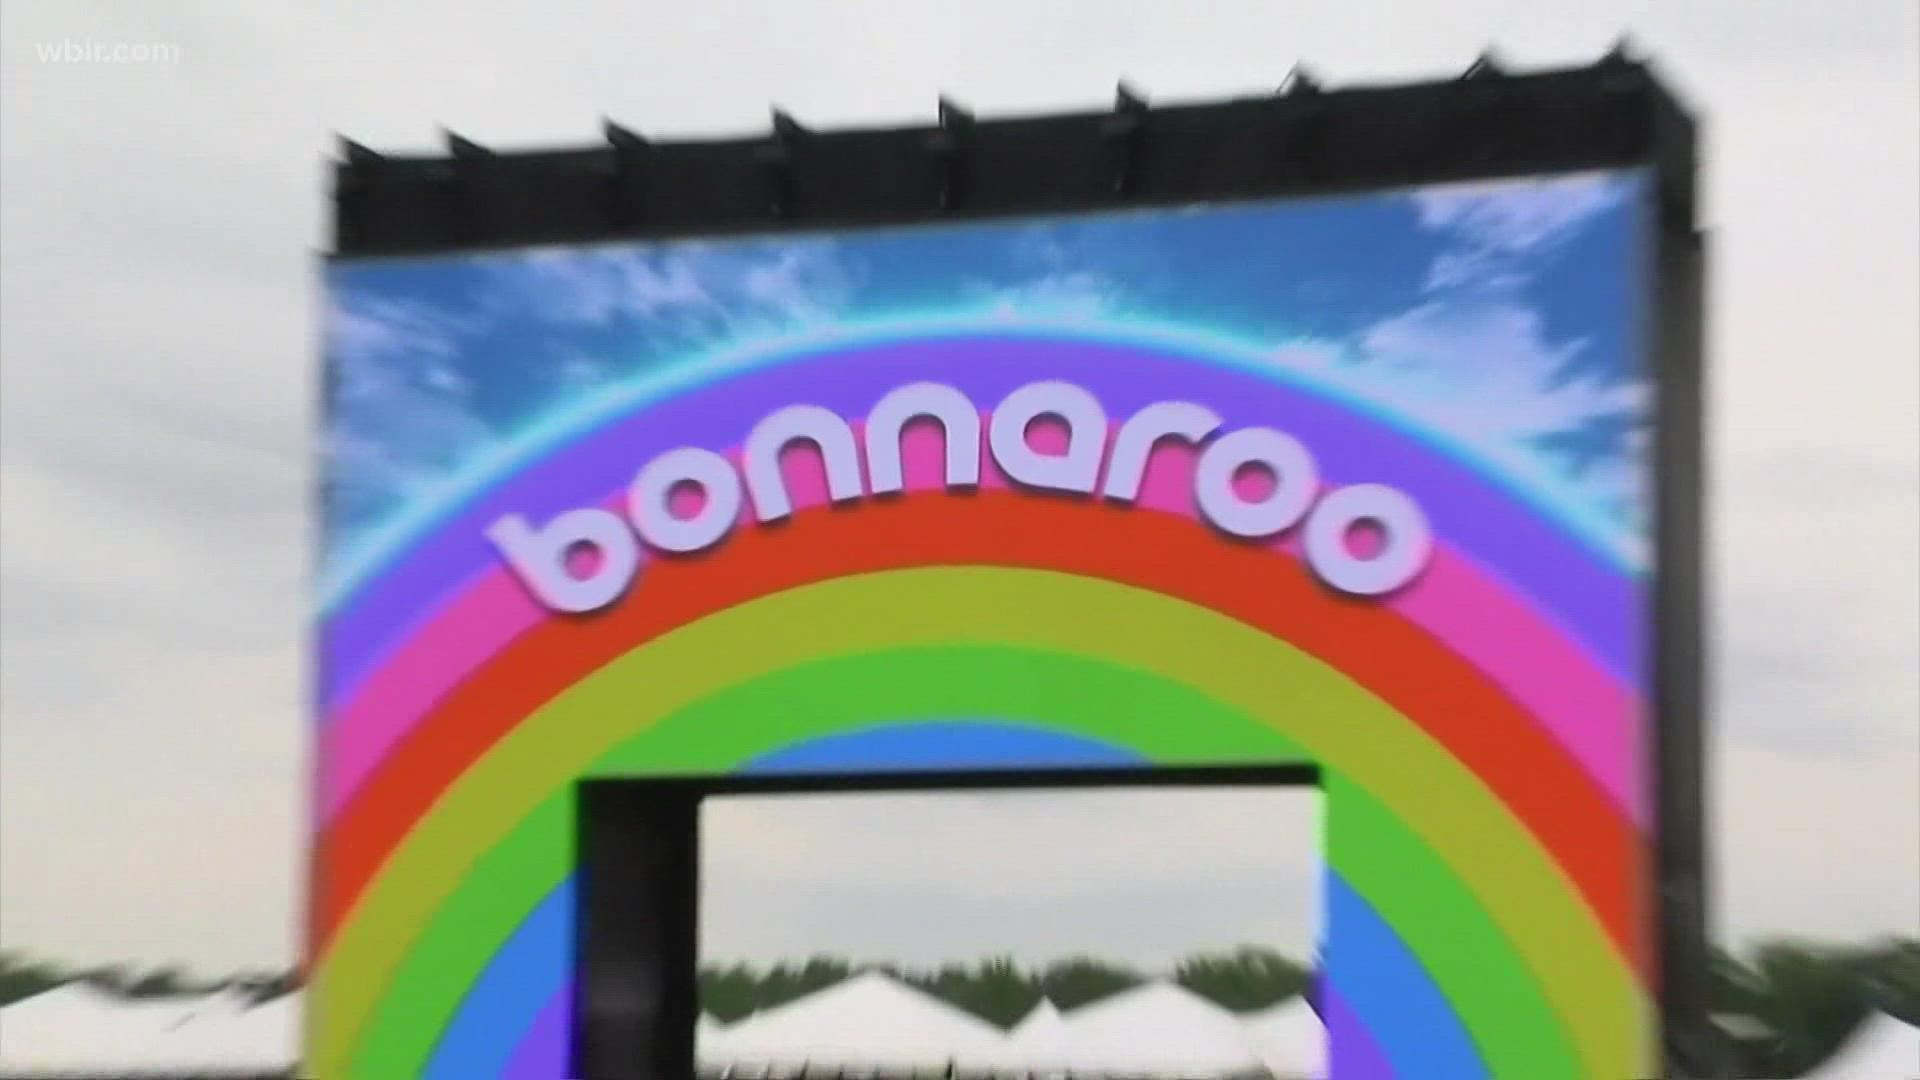 Bonnaroo announced Tuesday it'll require proof of vaccination to get into the festival grounds.